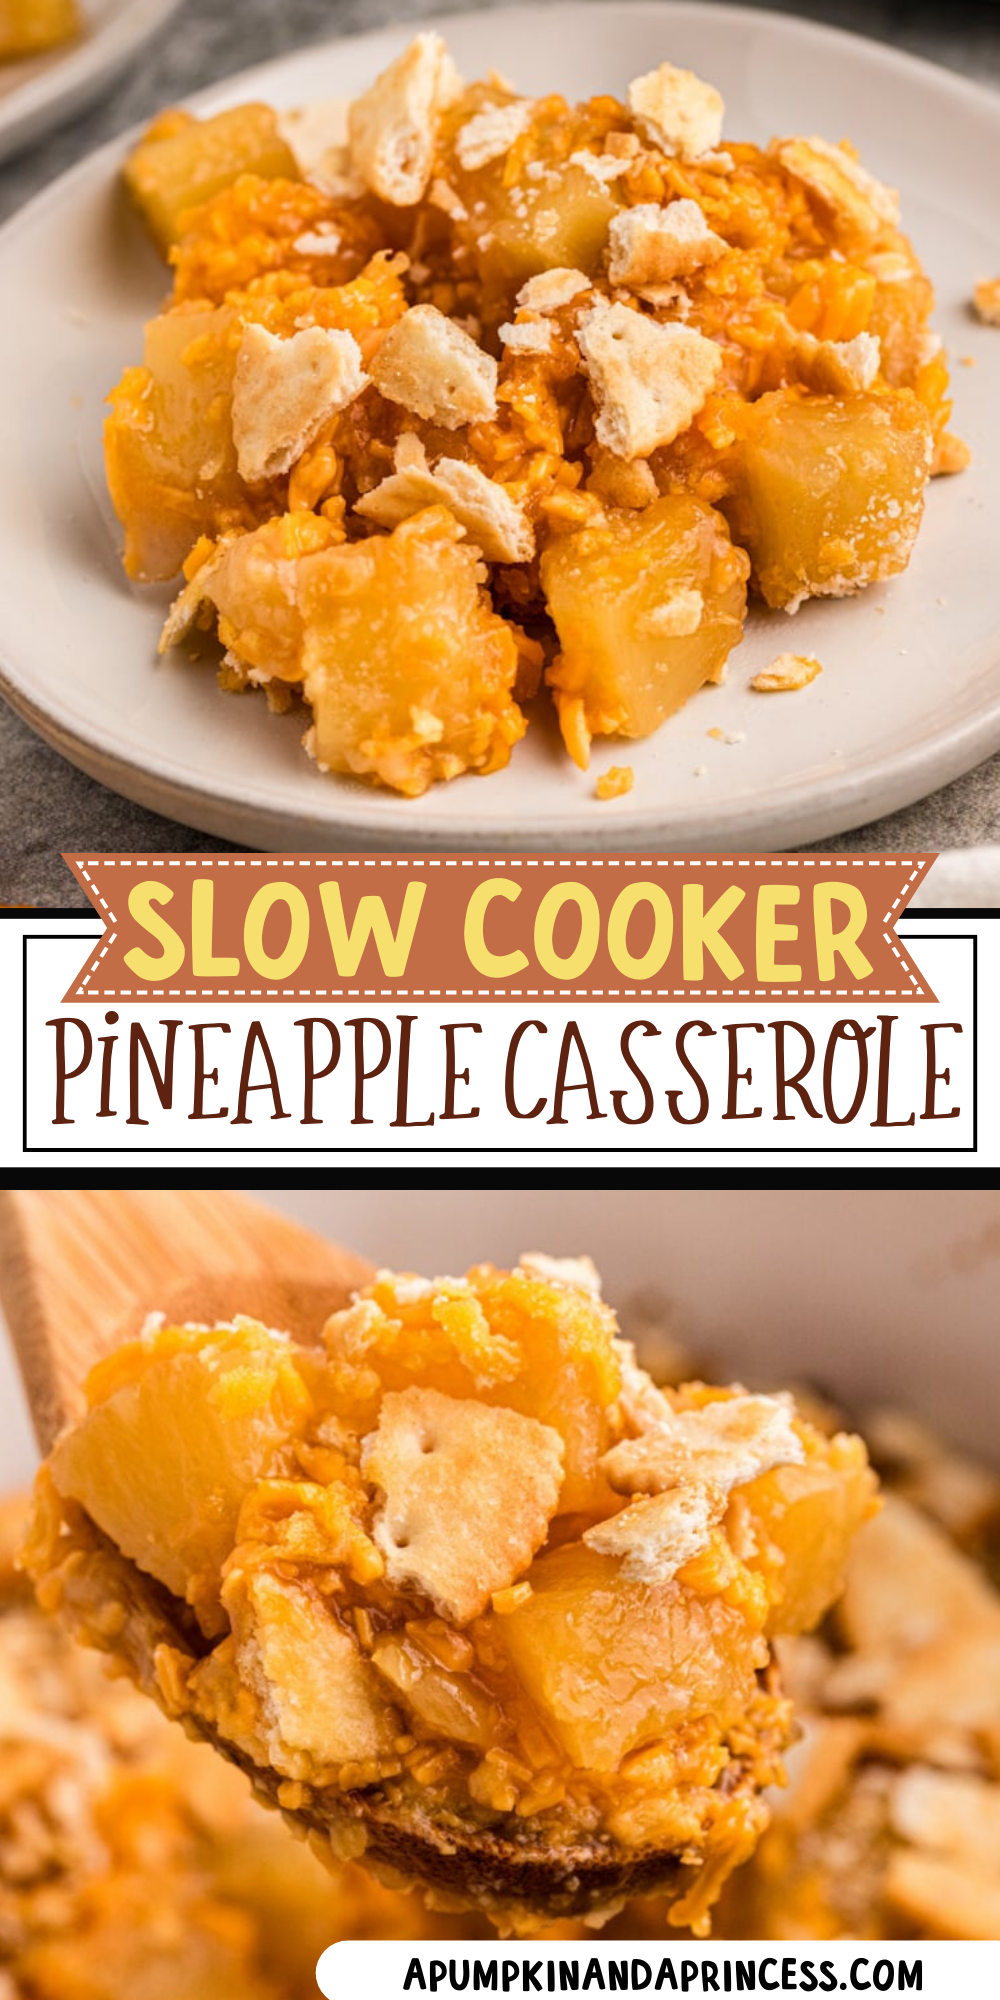 long image of pineapple casseroel with text overlay.